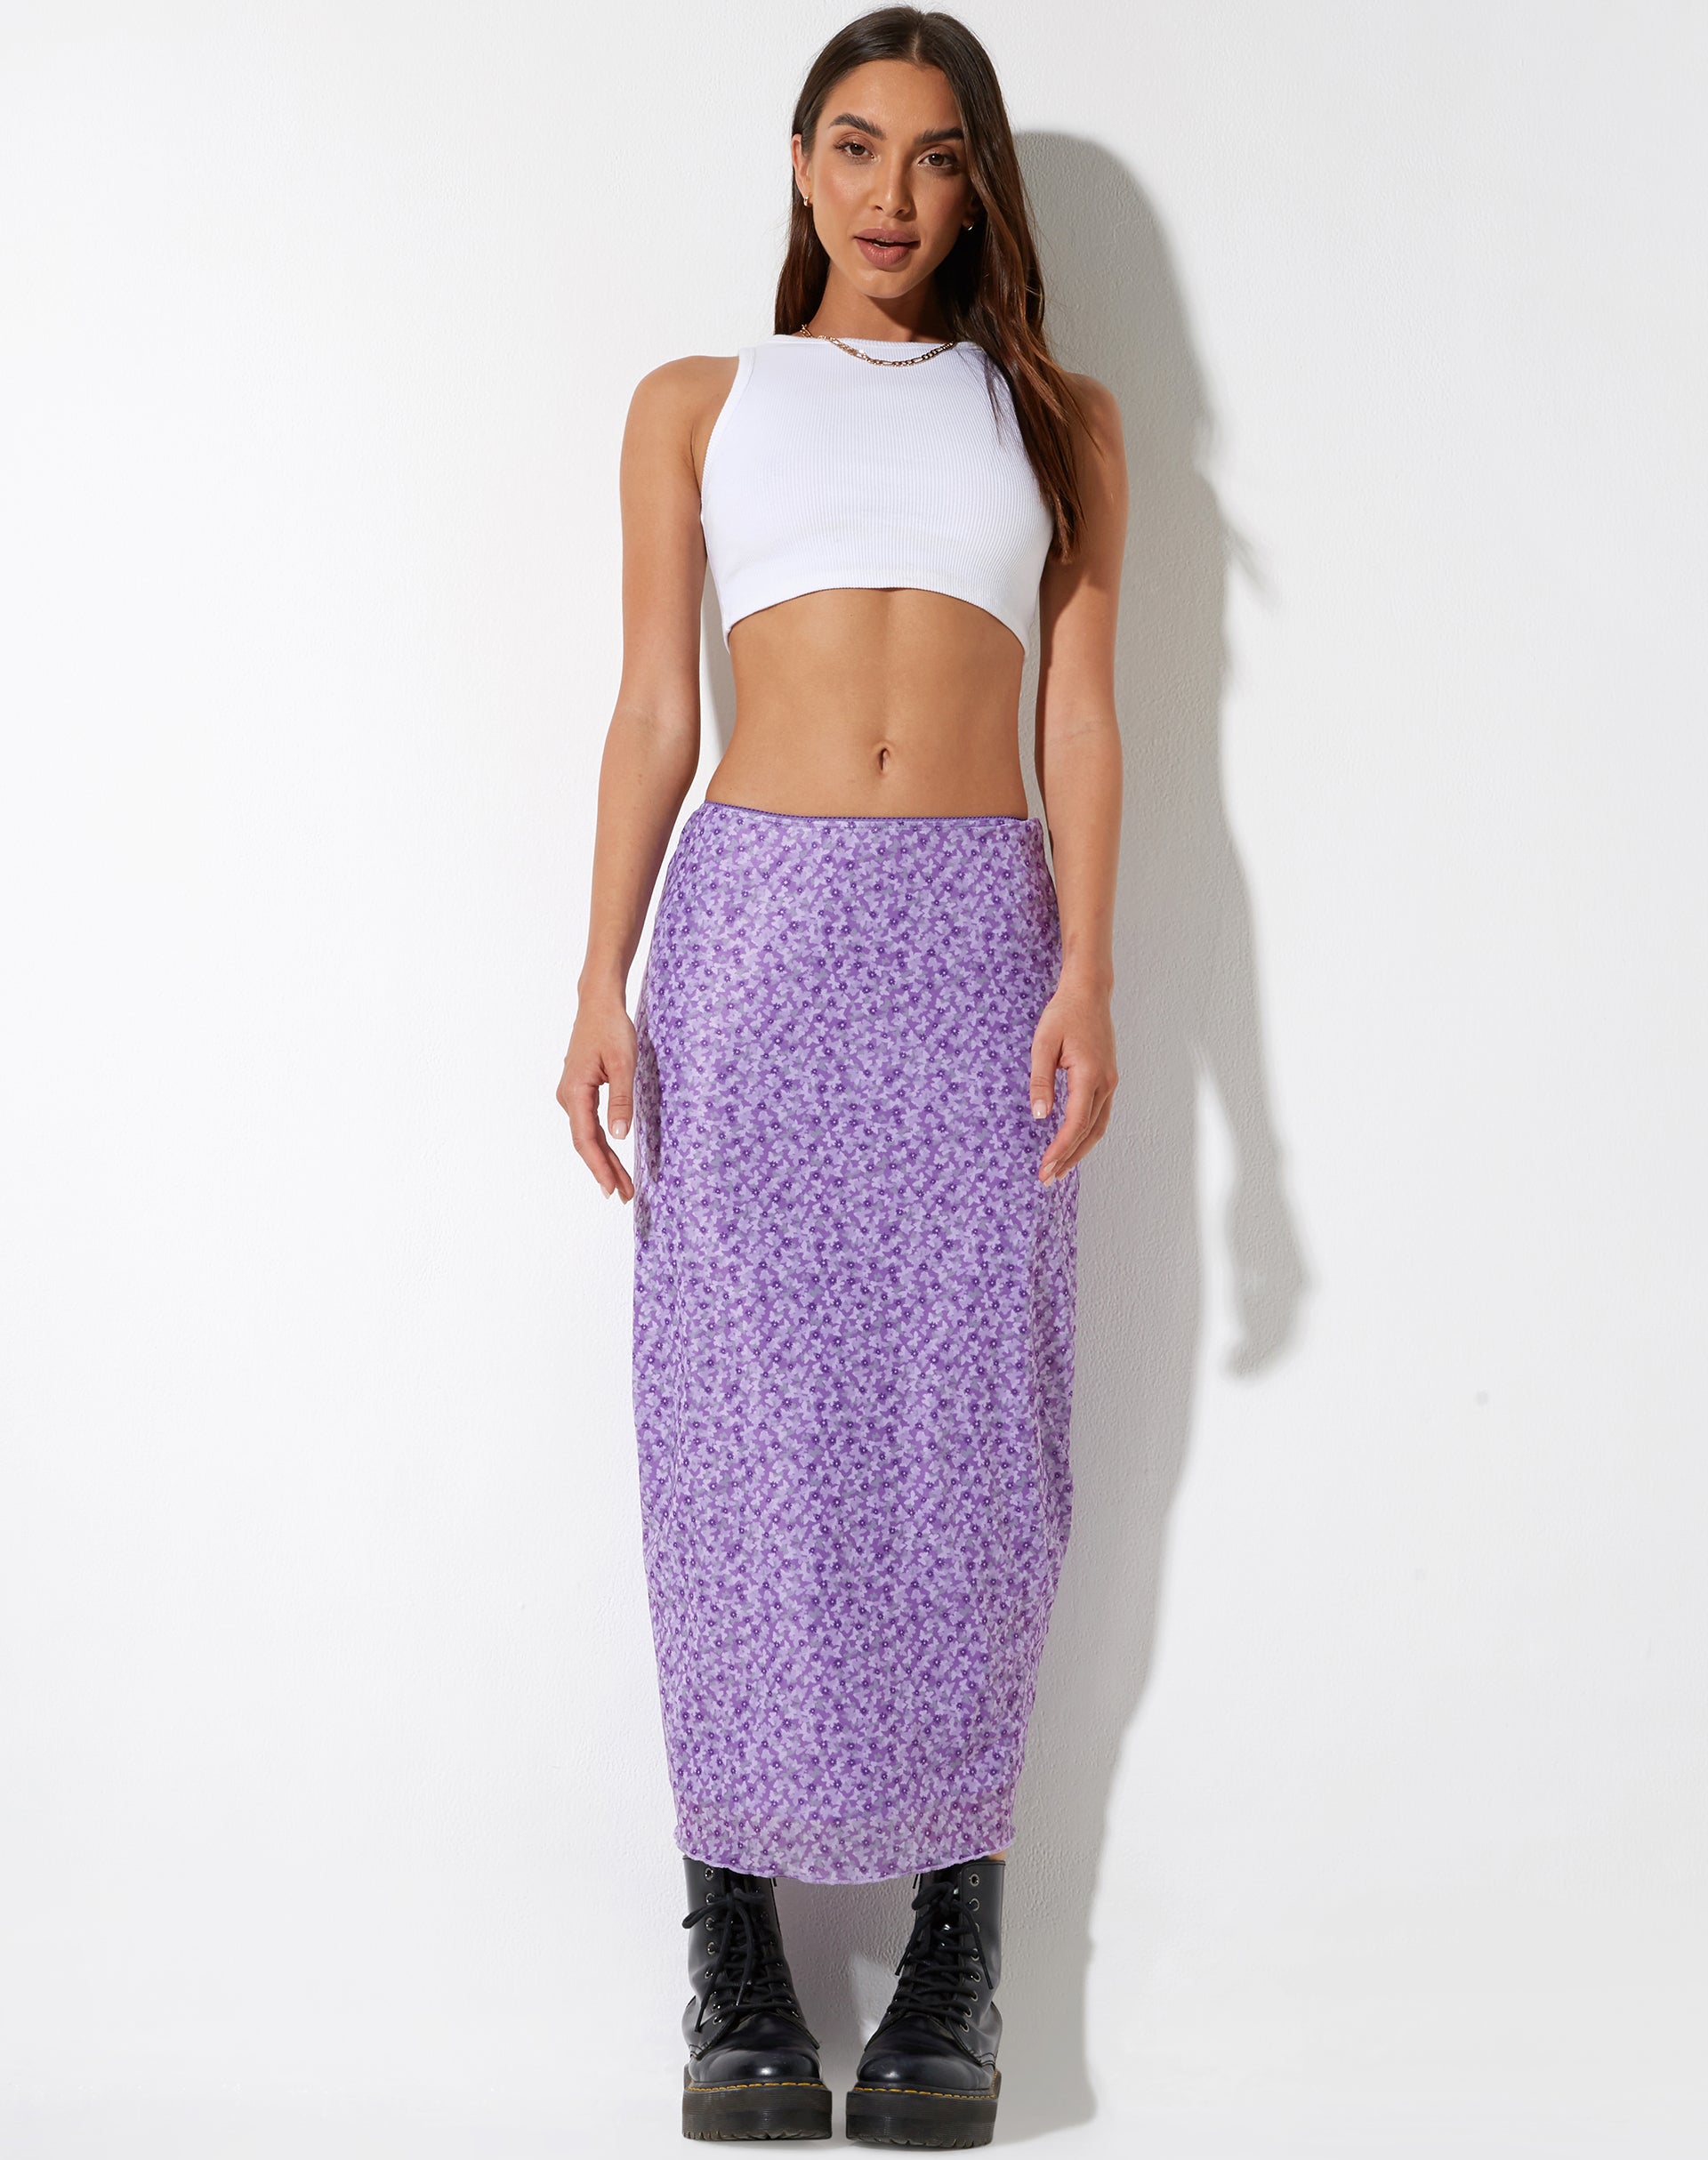 Image of Lassie Maxi Skirt in Daisy Floral Lilac